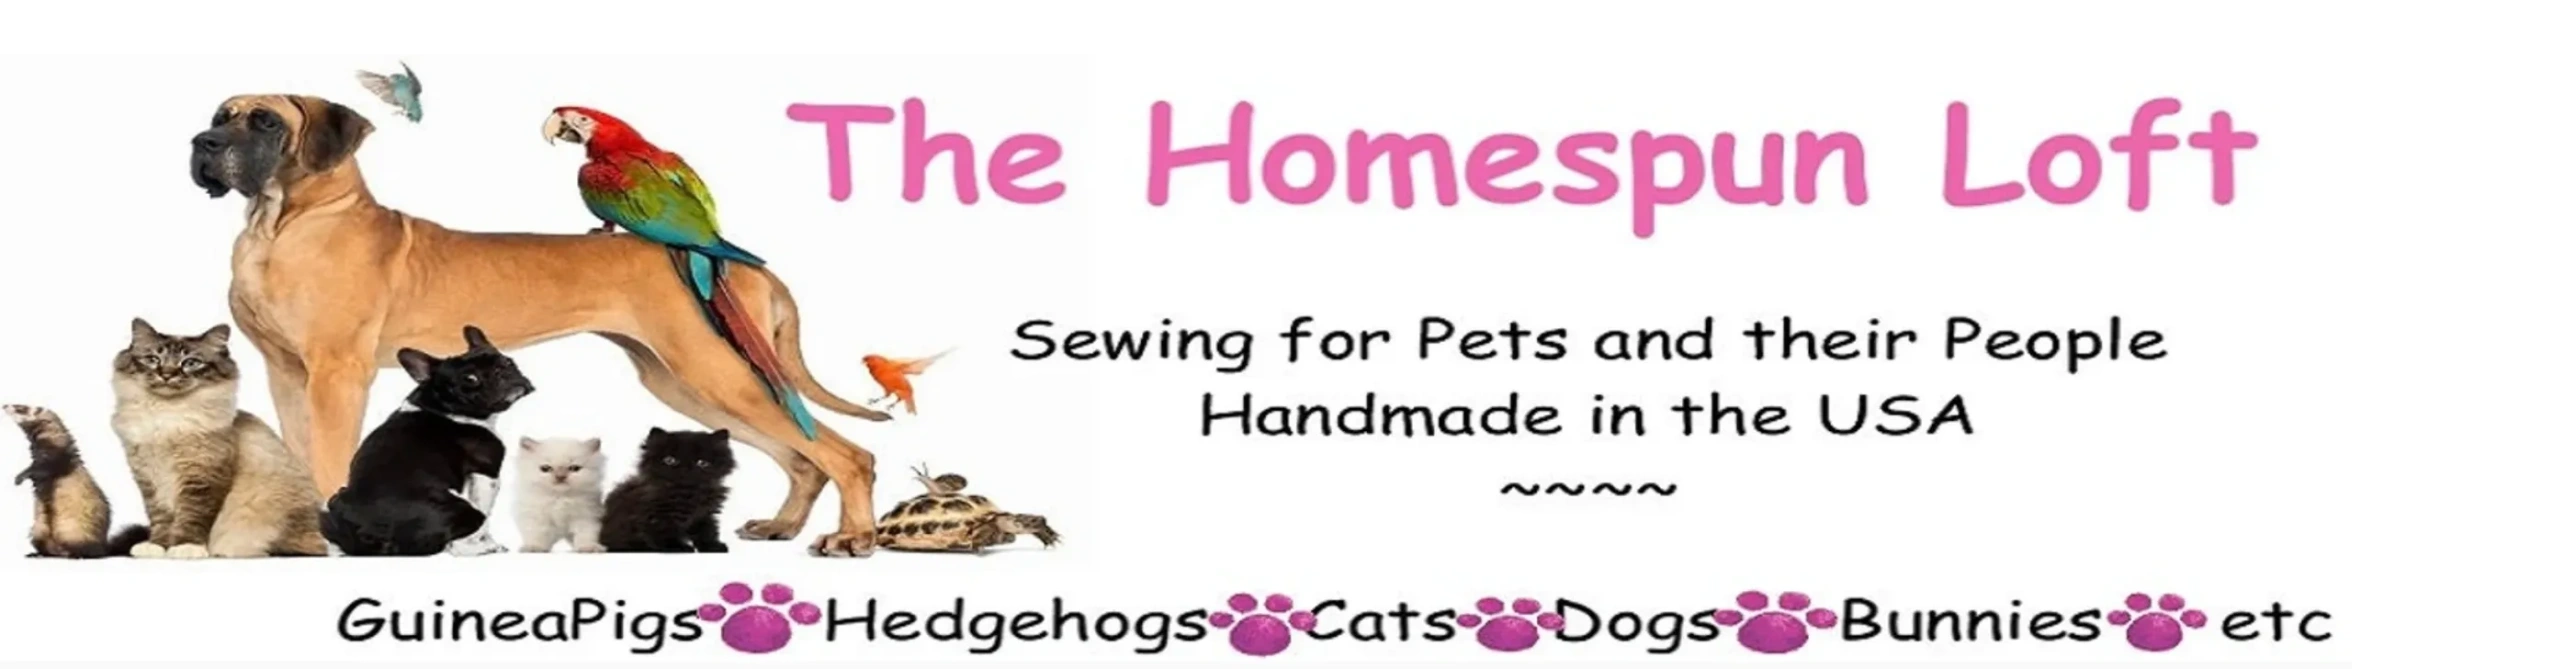 Sewing for Pets and their People. Home Goods and Gifts